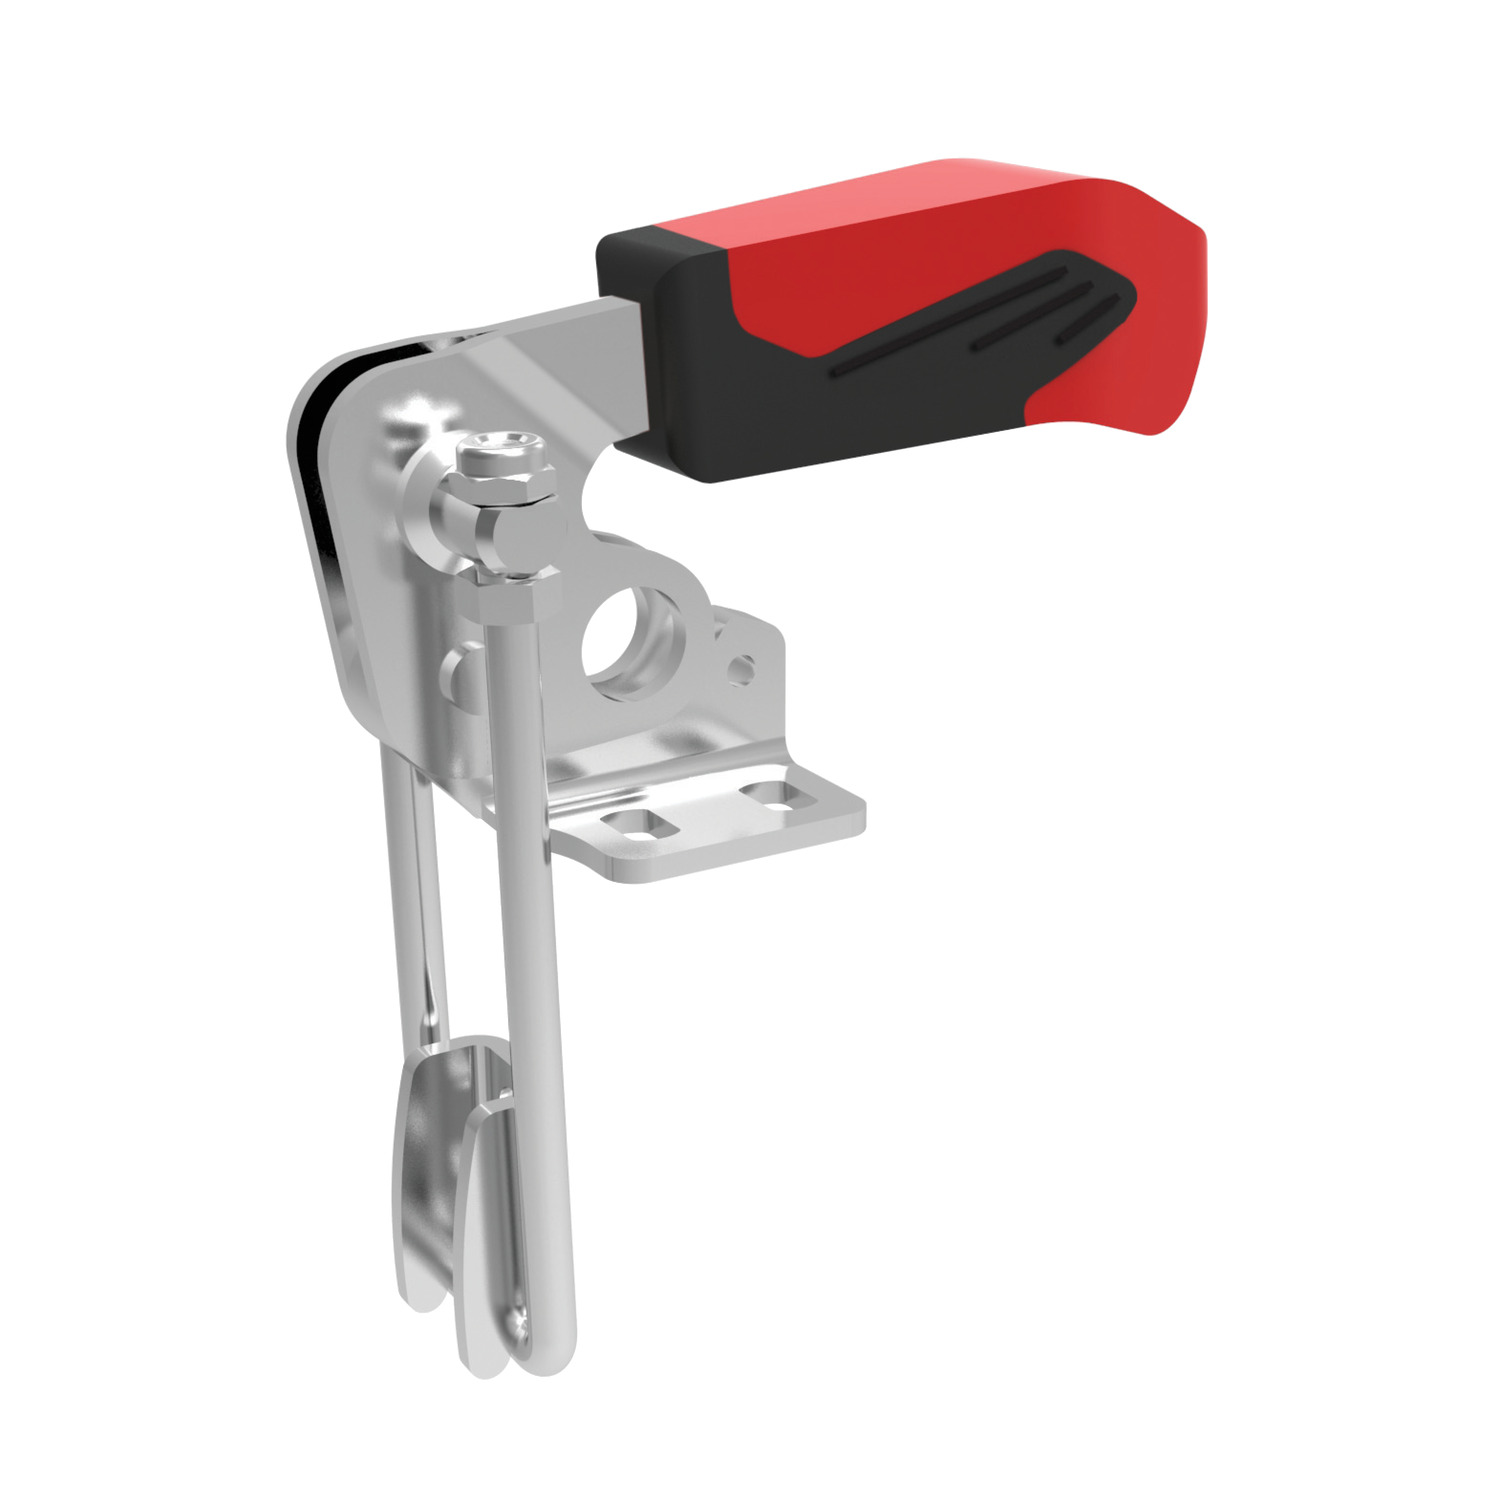 Latch Type Toggle Clamps Vertical acting latch type toggle clamp supplied with counter catch. Zinc plated steel body with an ergonomic, oil resistant handle.